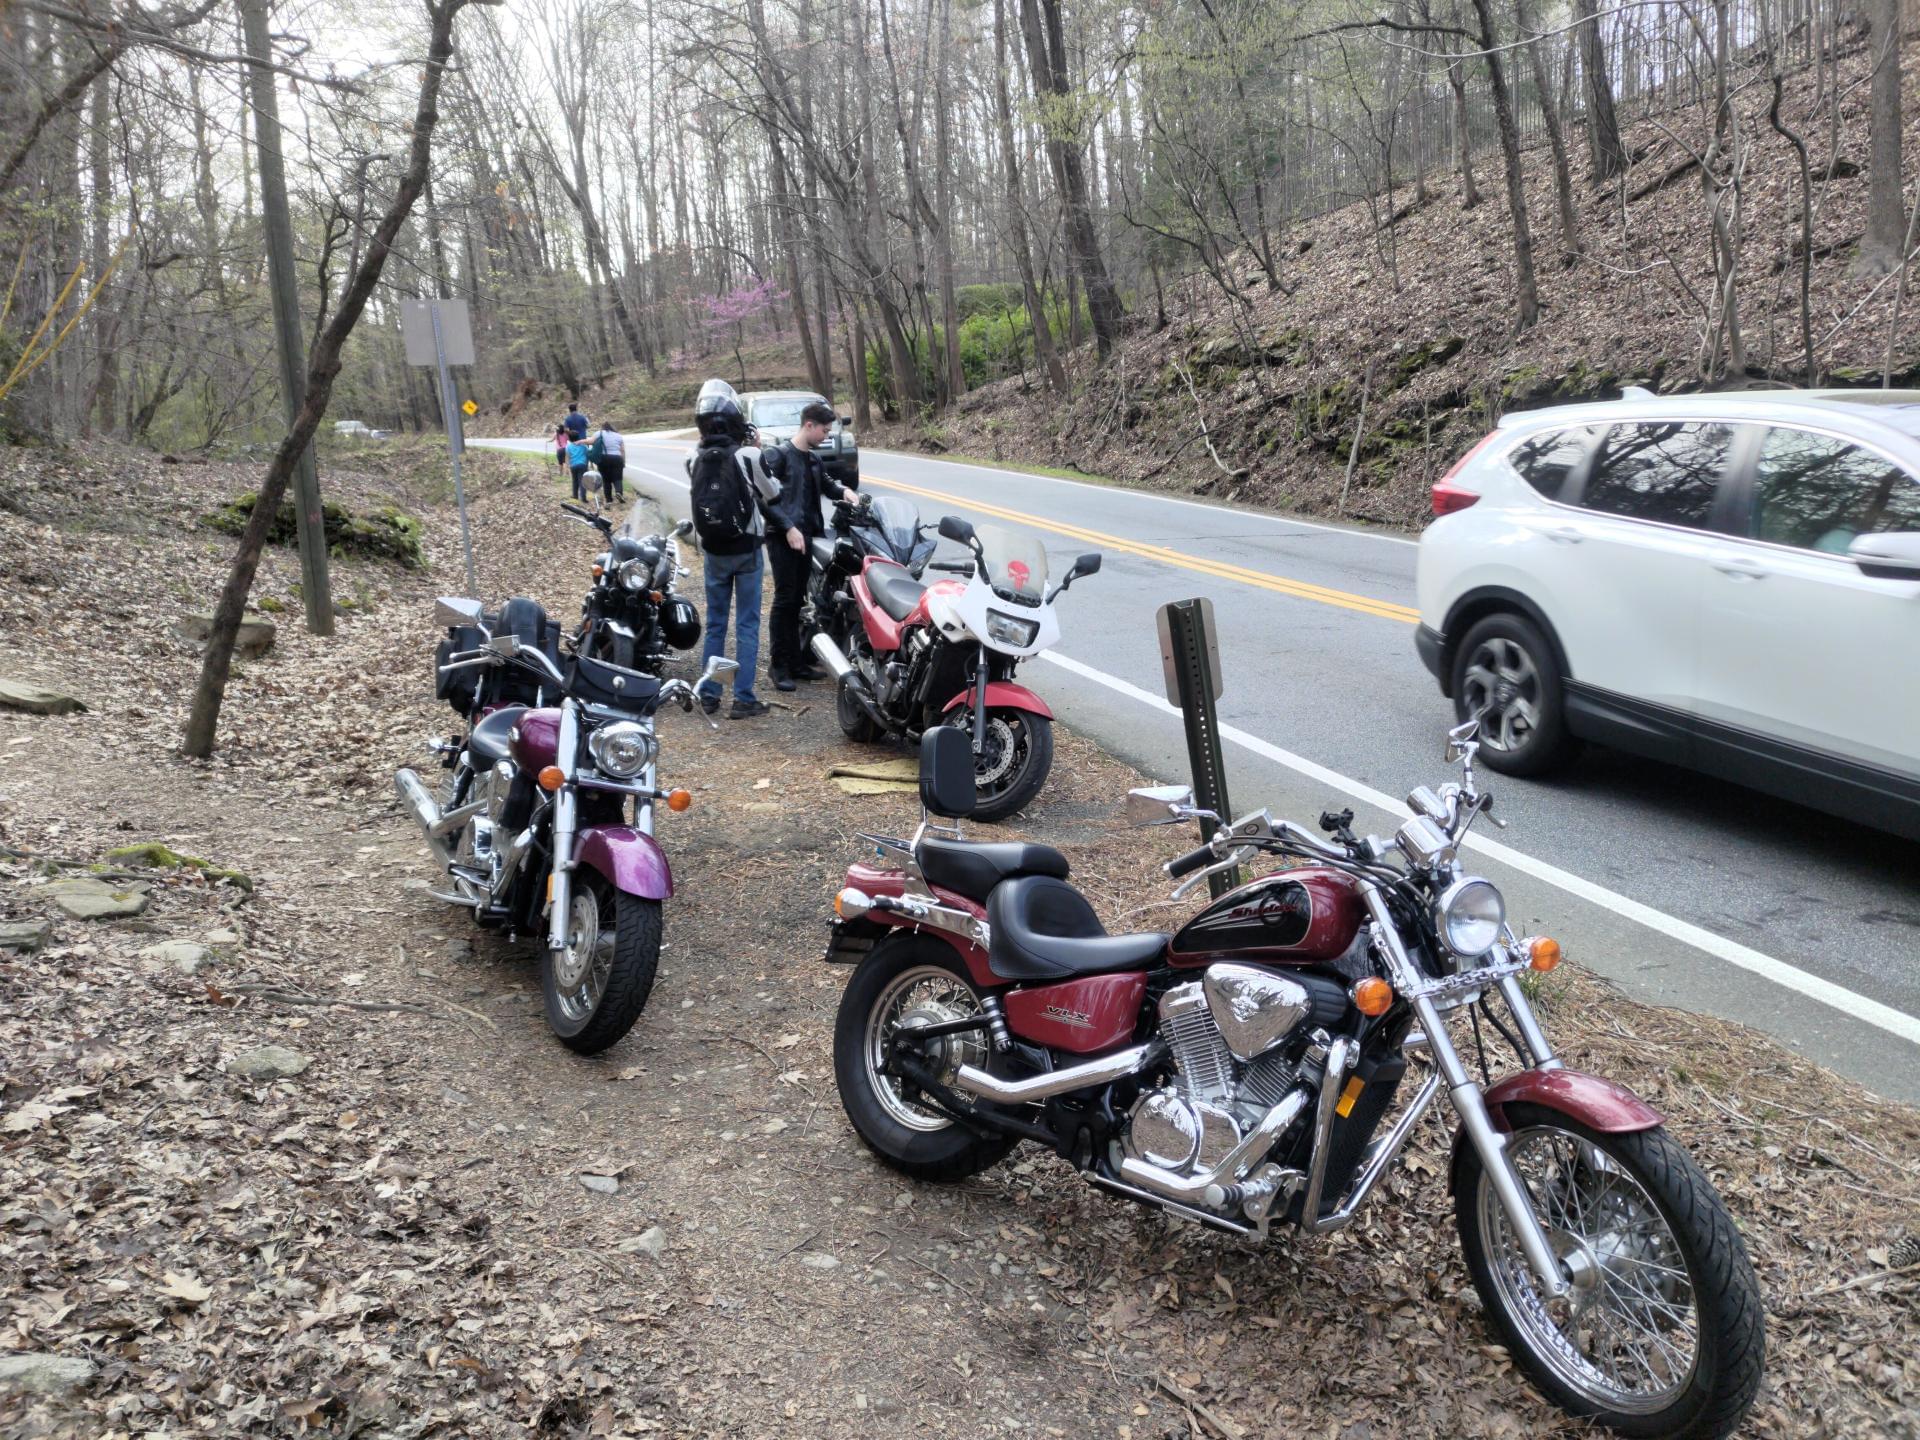 Several motorcycles pulled off onto the dirt between a trail and the road.